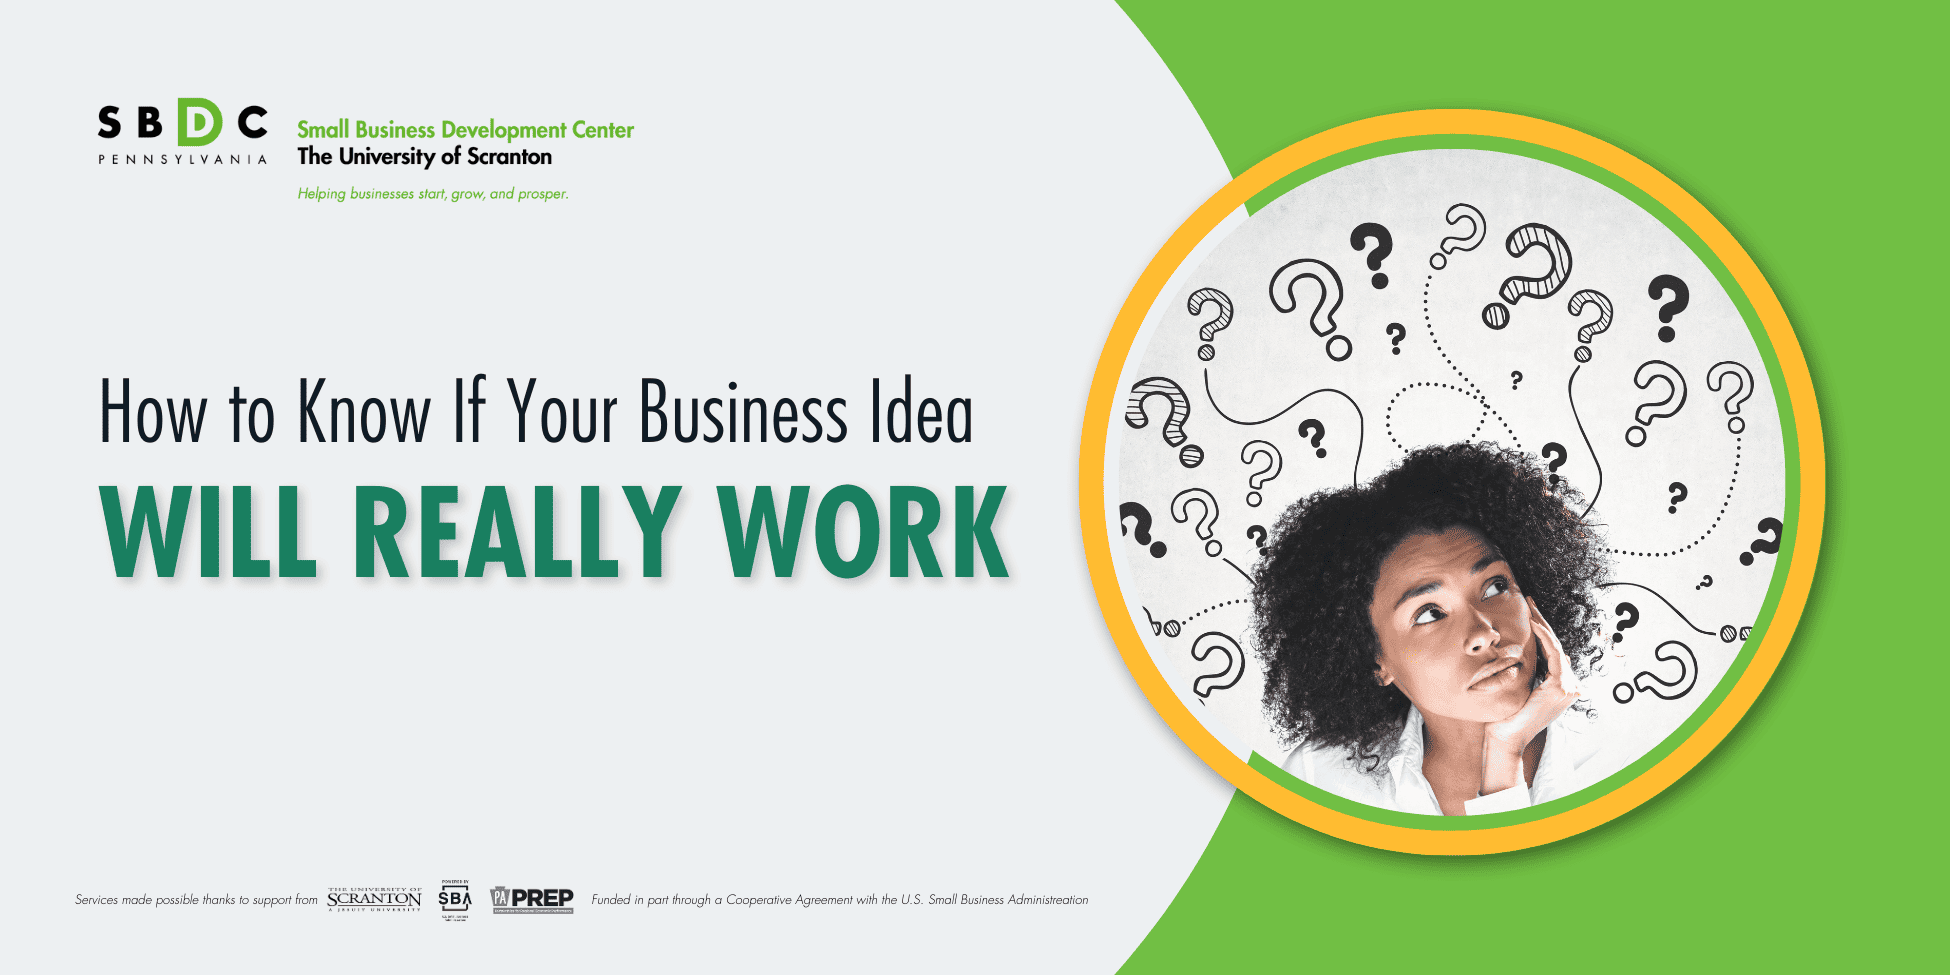 How to Know if Your Business Idea Will Really Work